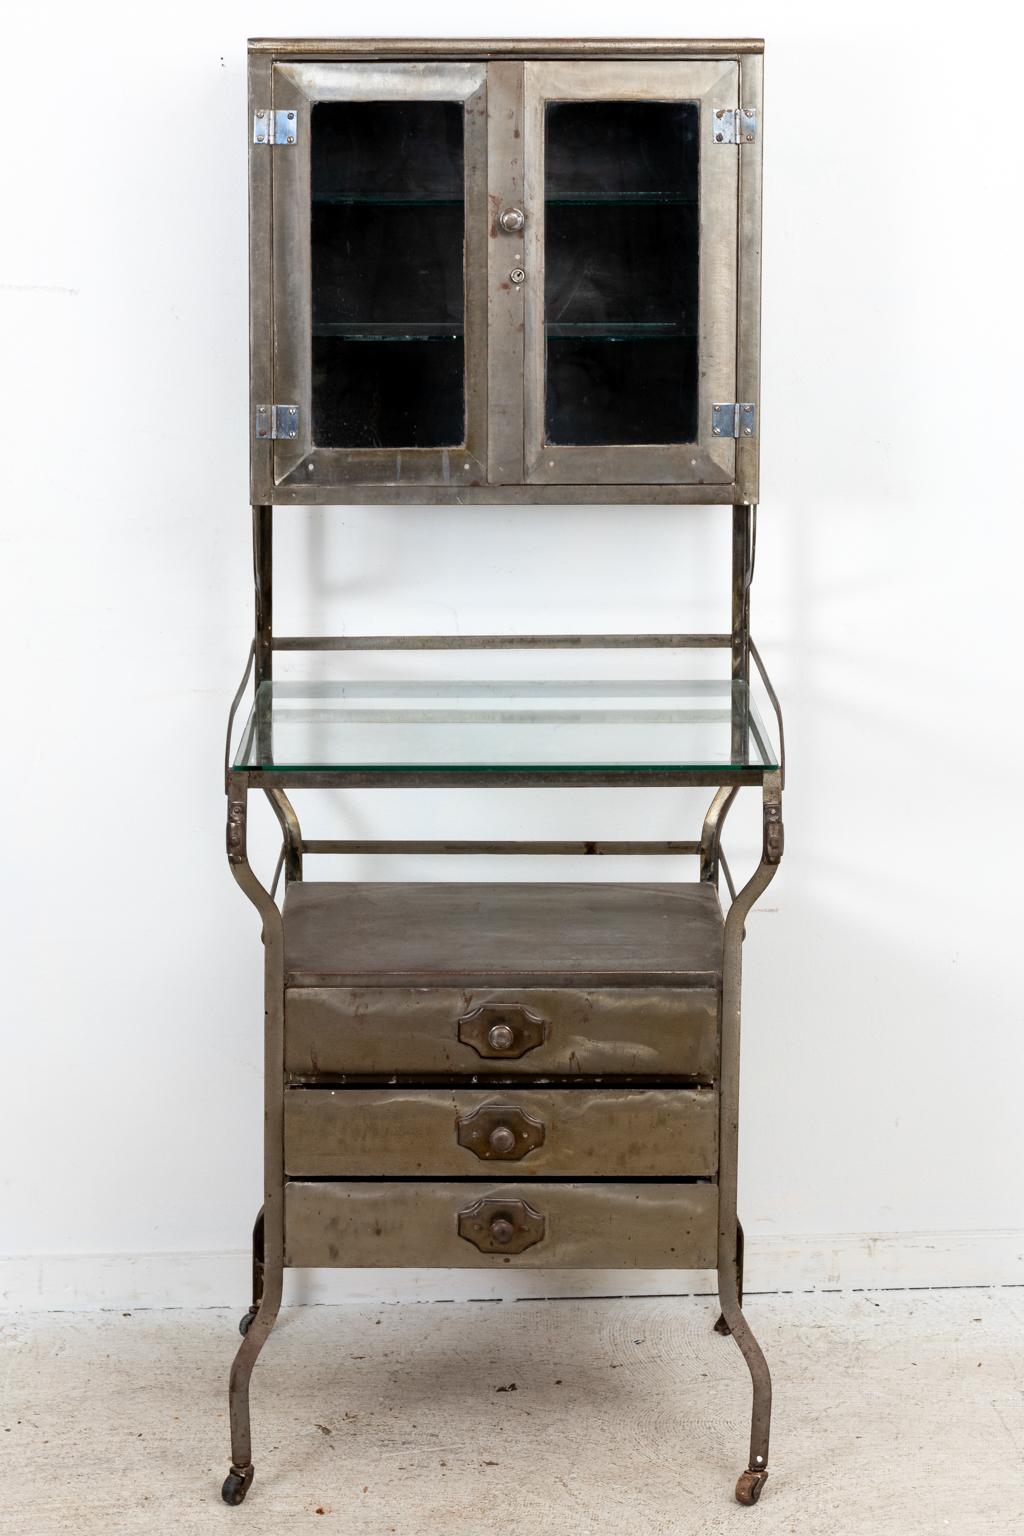 Industrial style steel and glass multi-level storage cabinet with round pulls. The piece is constructed with a glass front cabinet on the top, a central glass top work table, and a steel three drawer chest on the base for further storage. Between